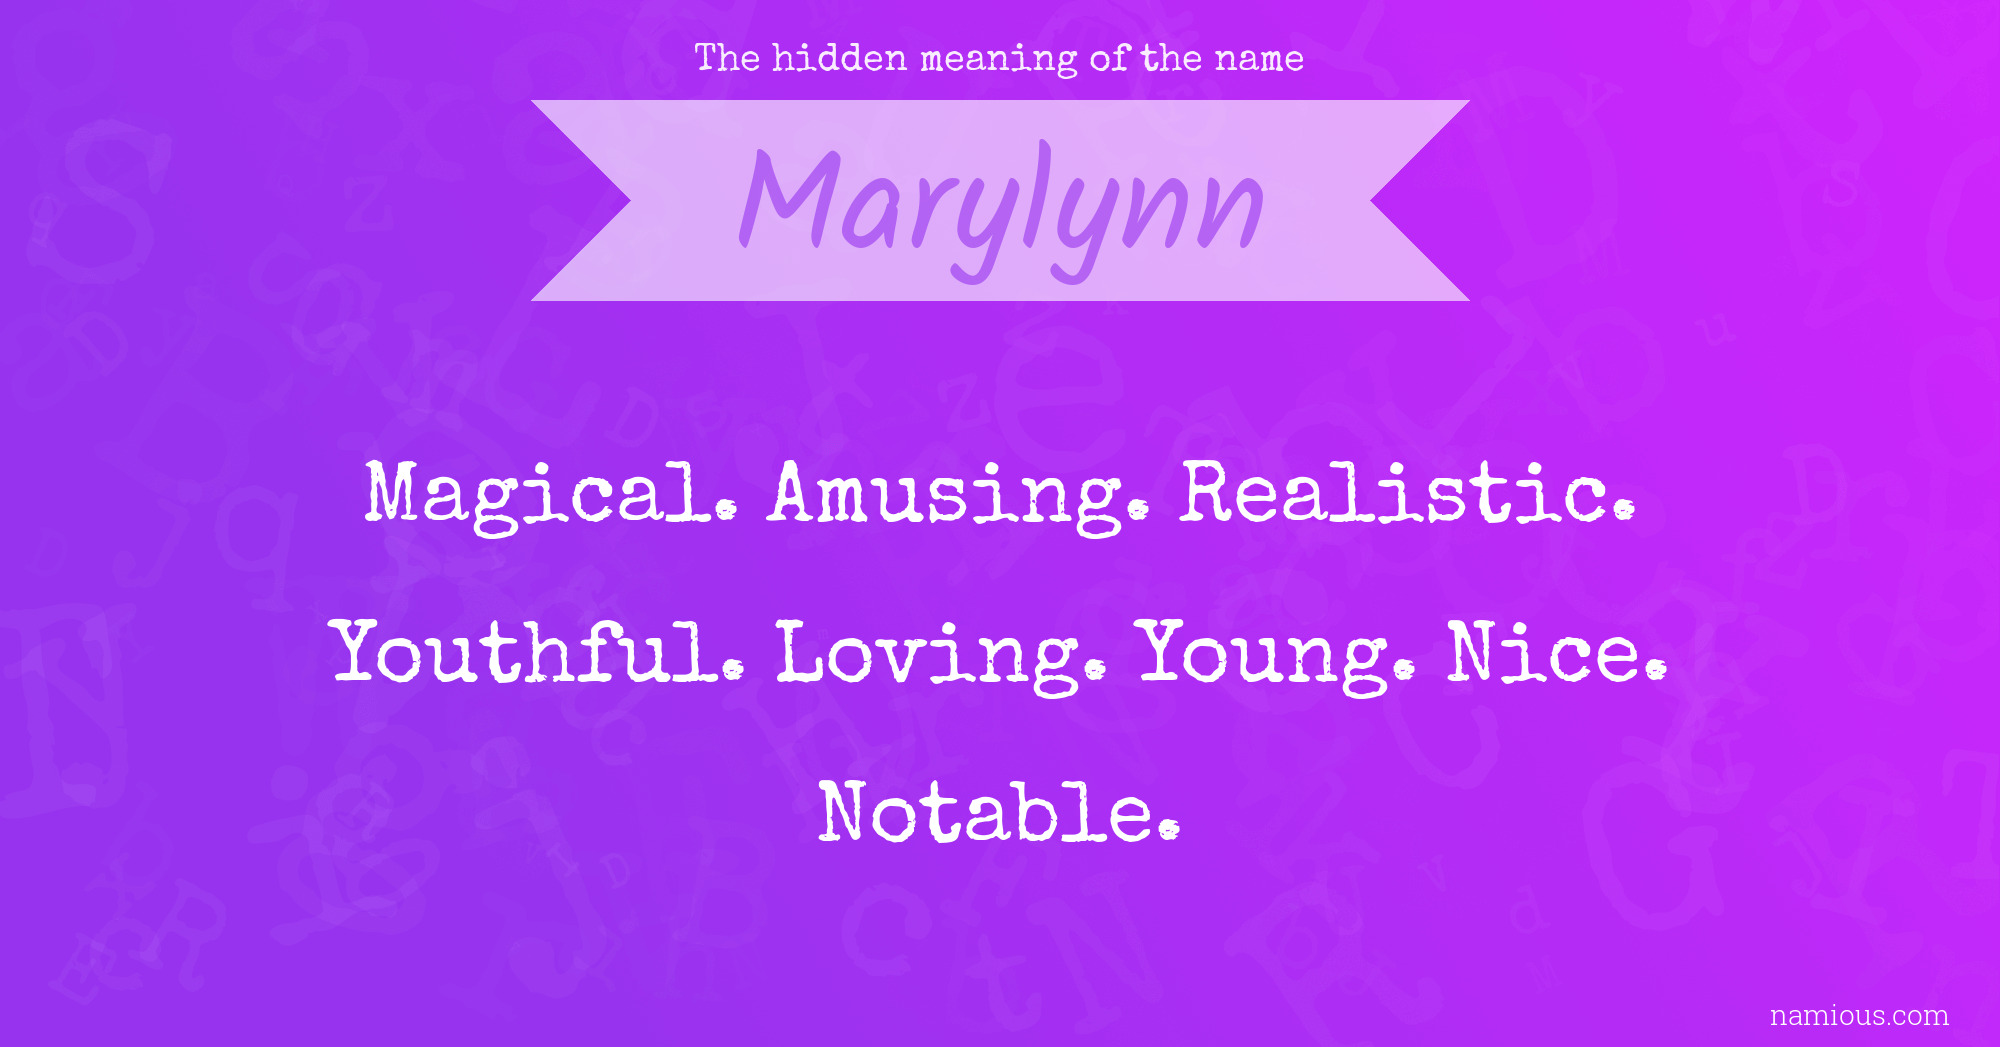 The hidden meaning of the name Marylynn